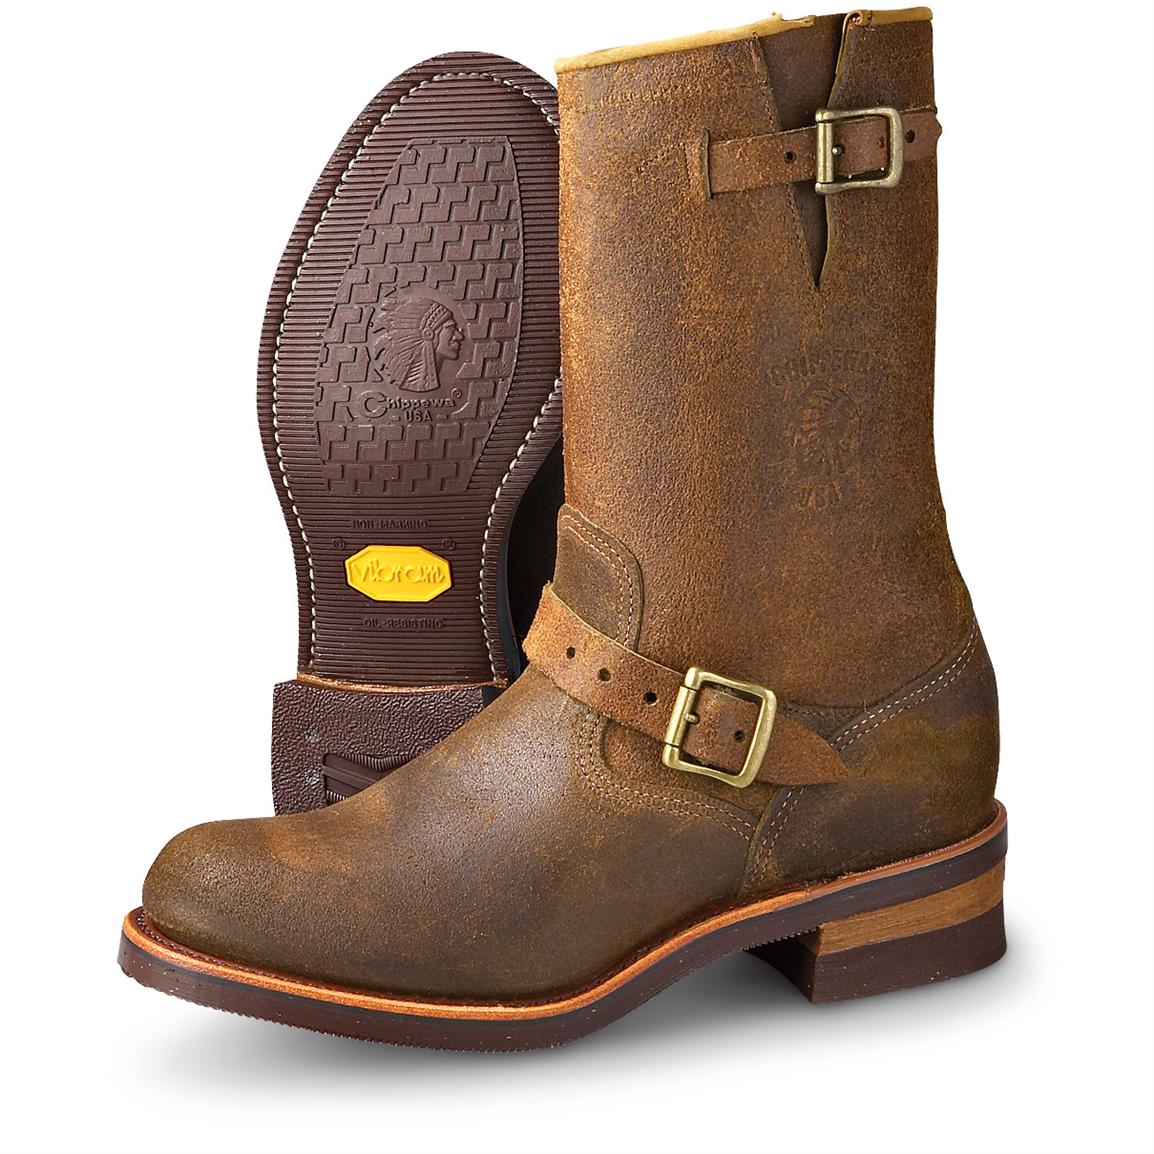 Men's Chippewa® 11" Engineer Boots, Brown - 146924, Motorcycle & Biker Boots at Sportsman's Guide